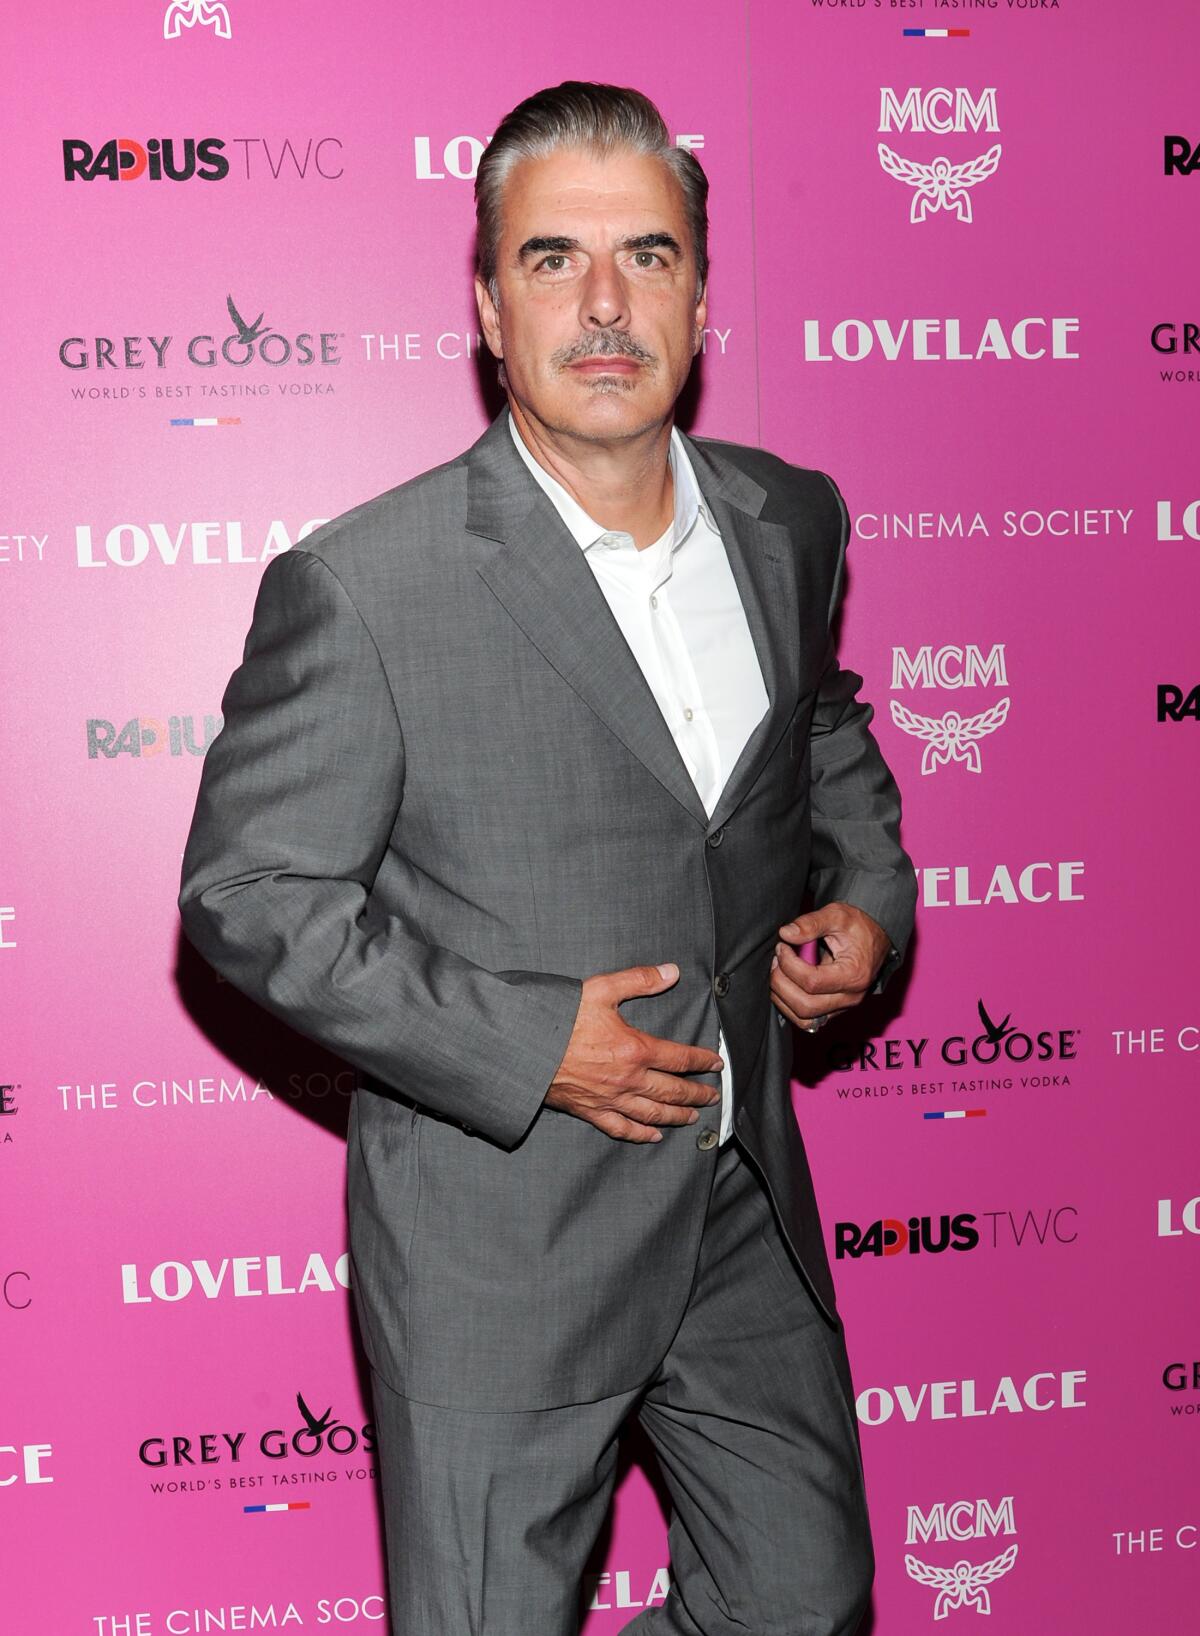 Chris Noth stands against a hot pink background in a gray suit and white shirt